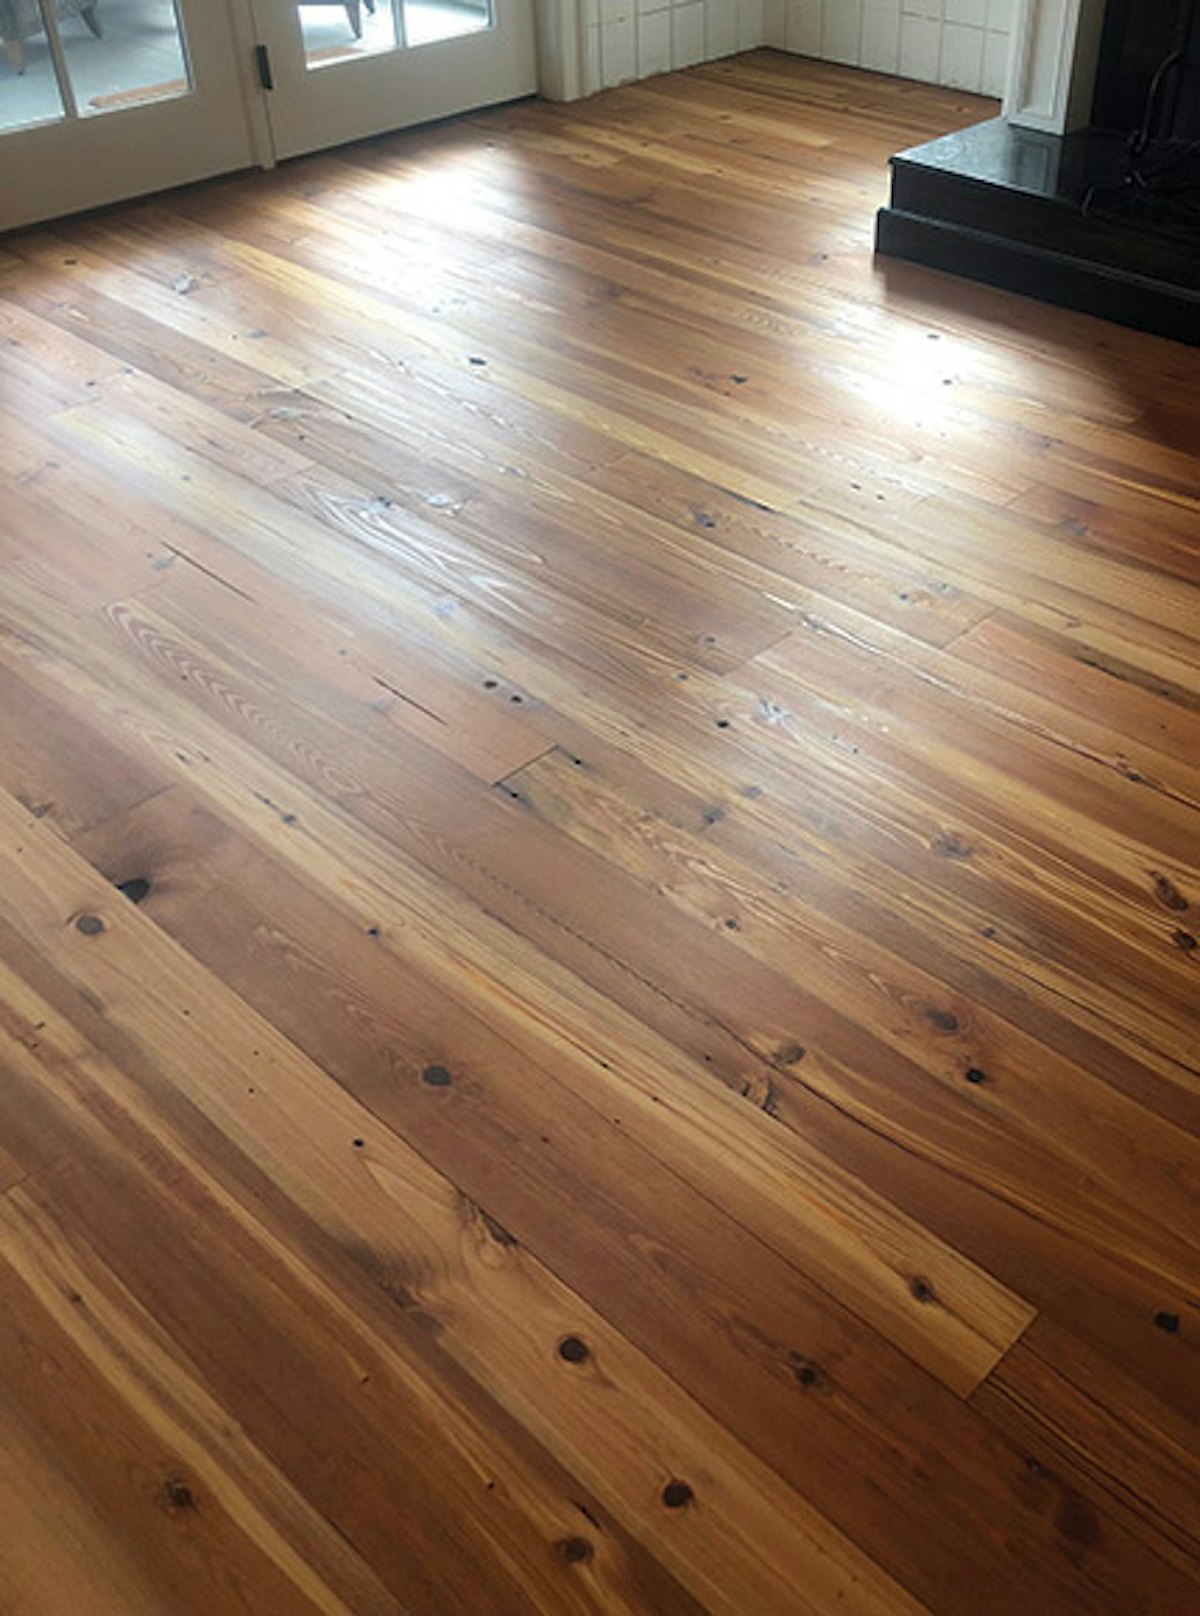 Wood Flooring Q&A: What To Do With Open Knots?